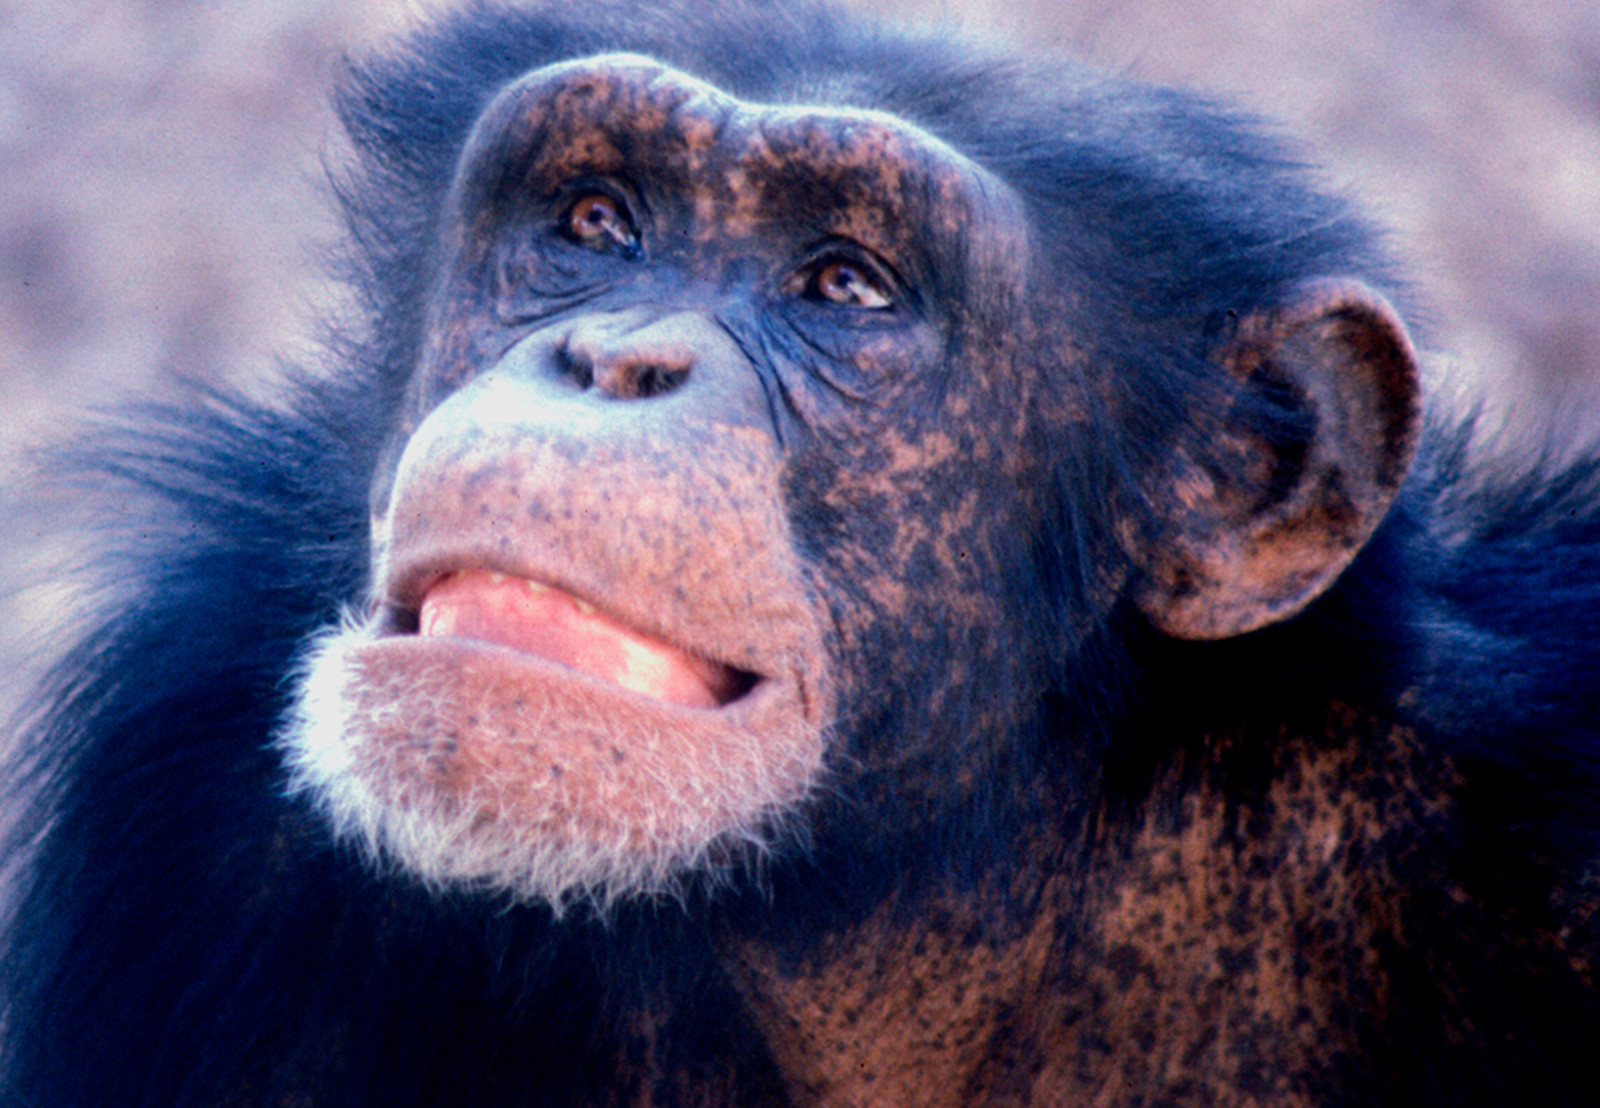 Making the Legal Case for the Rights of a Chimpanzee